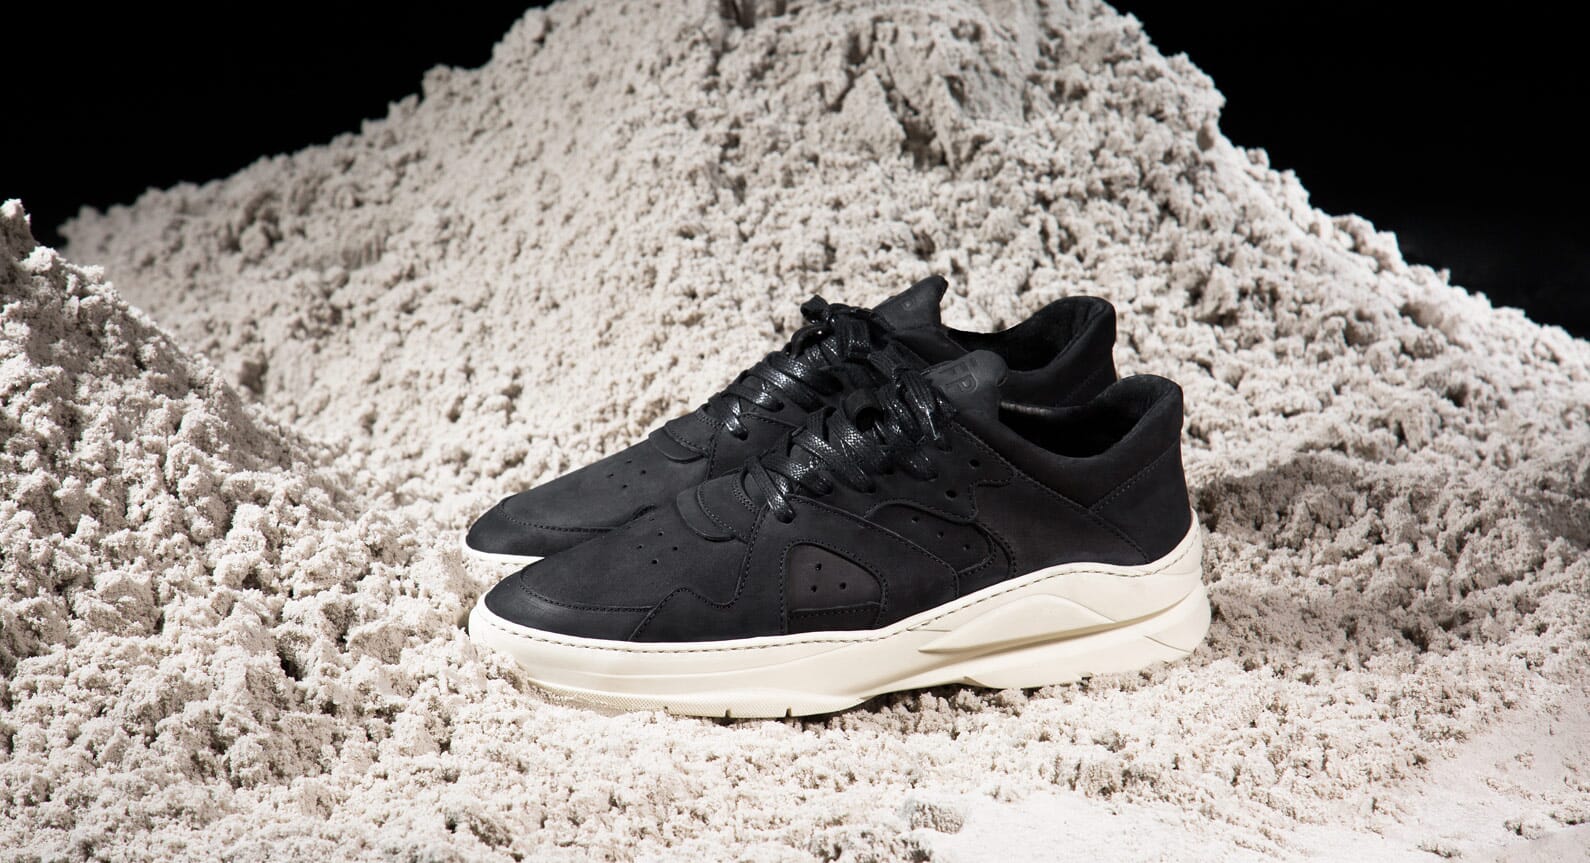 filling pieces trainers sale